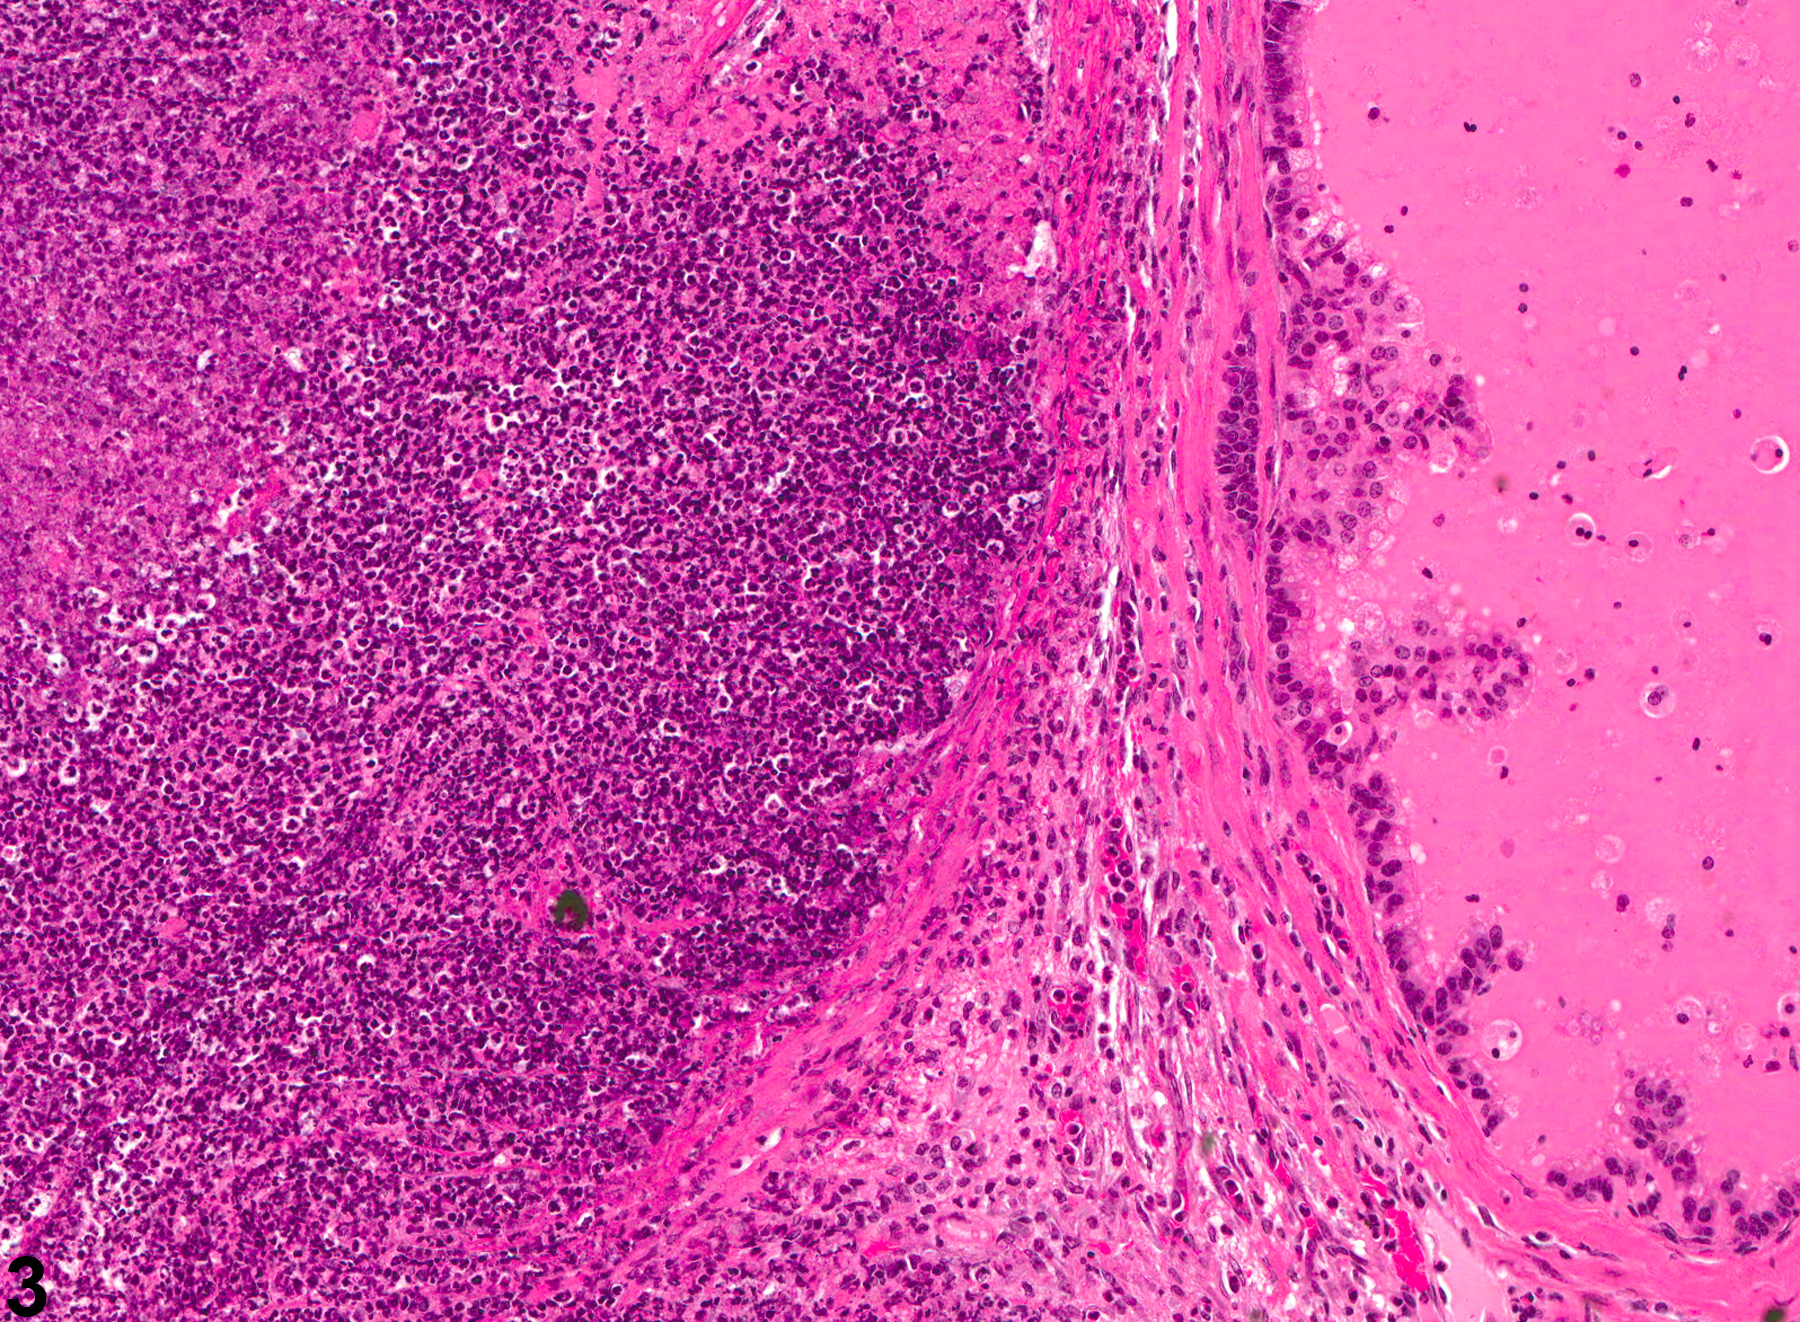 Image of inflammation in the coagulating gland from a male Swiss CD-1 mouse in a chronic study